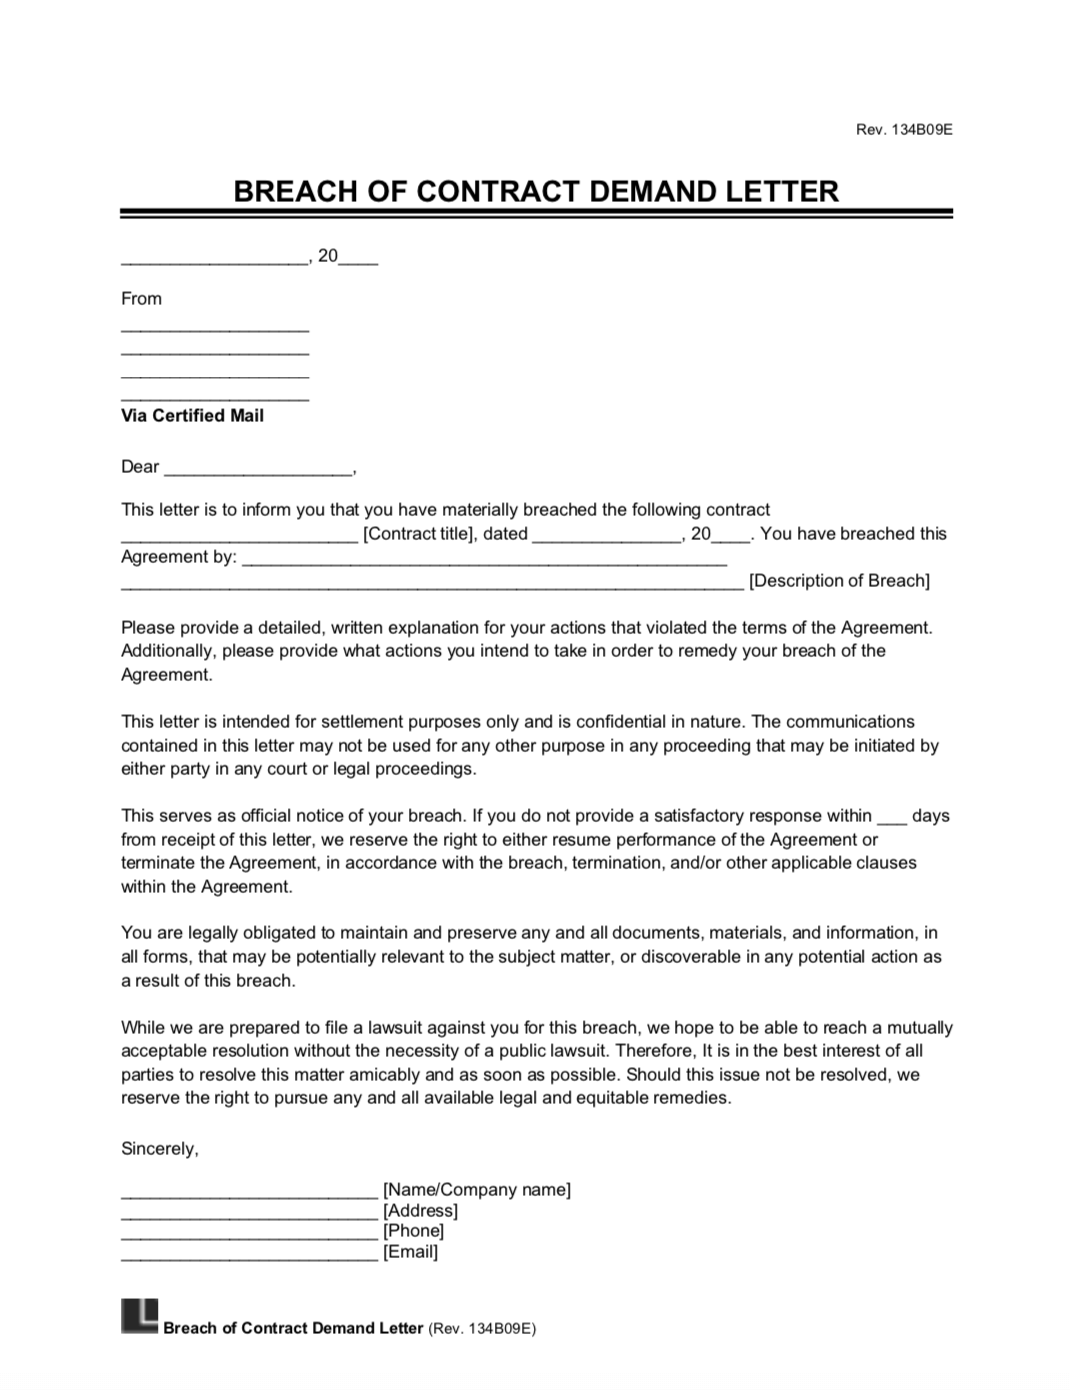 Breach of Contract Demand Letter Template